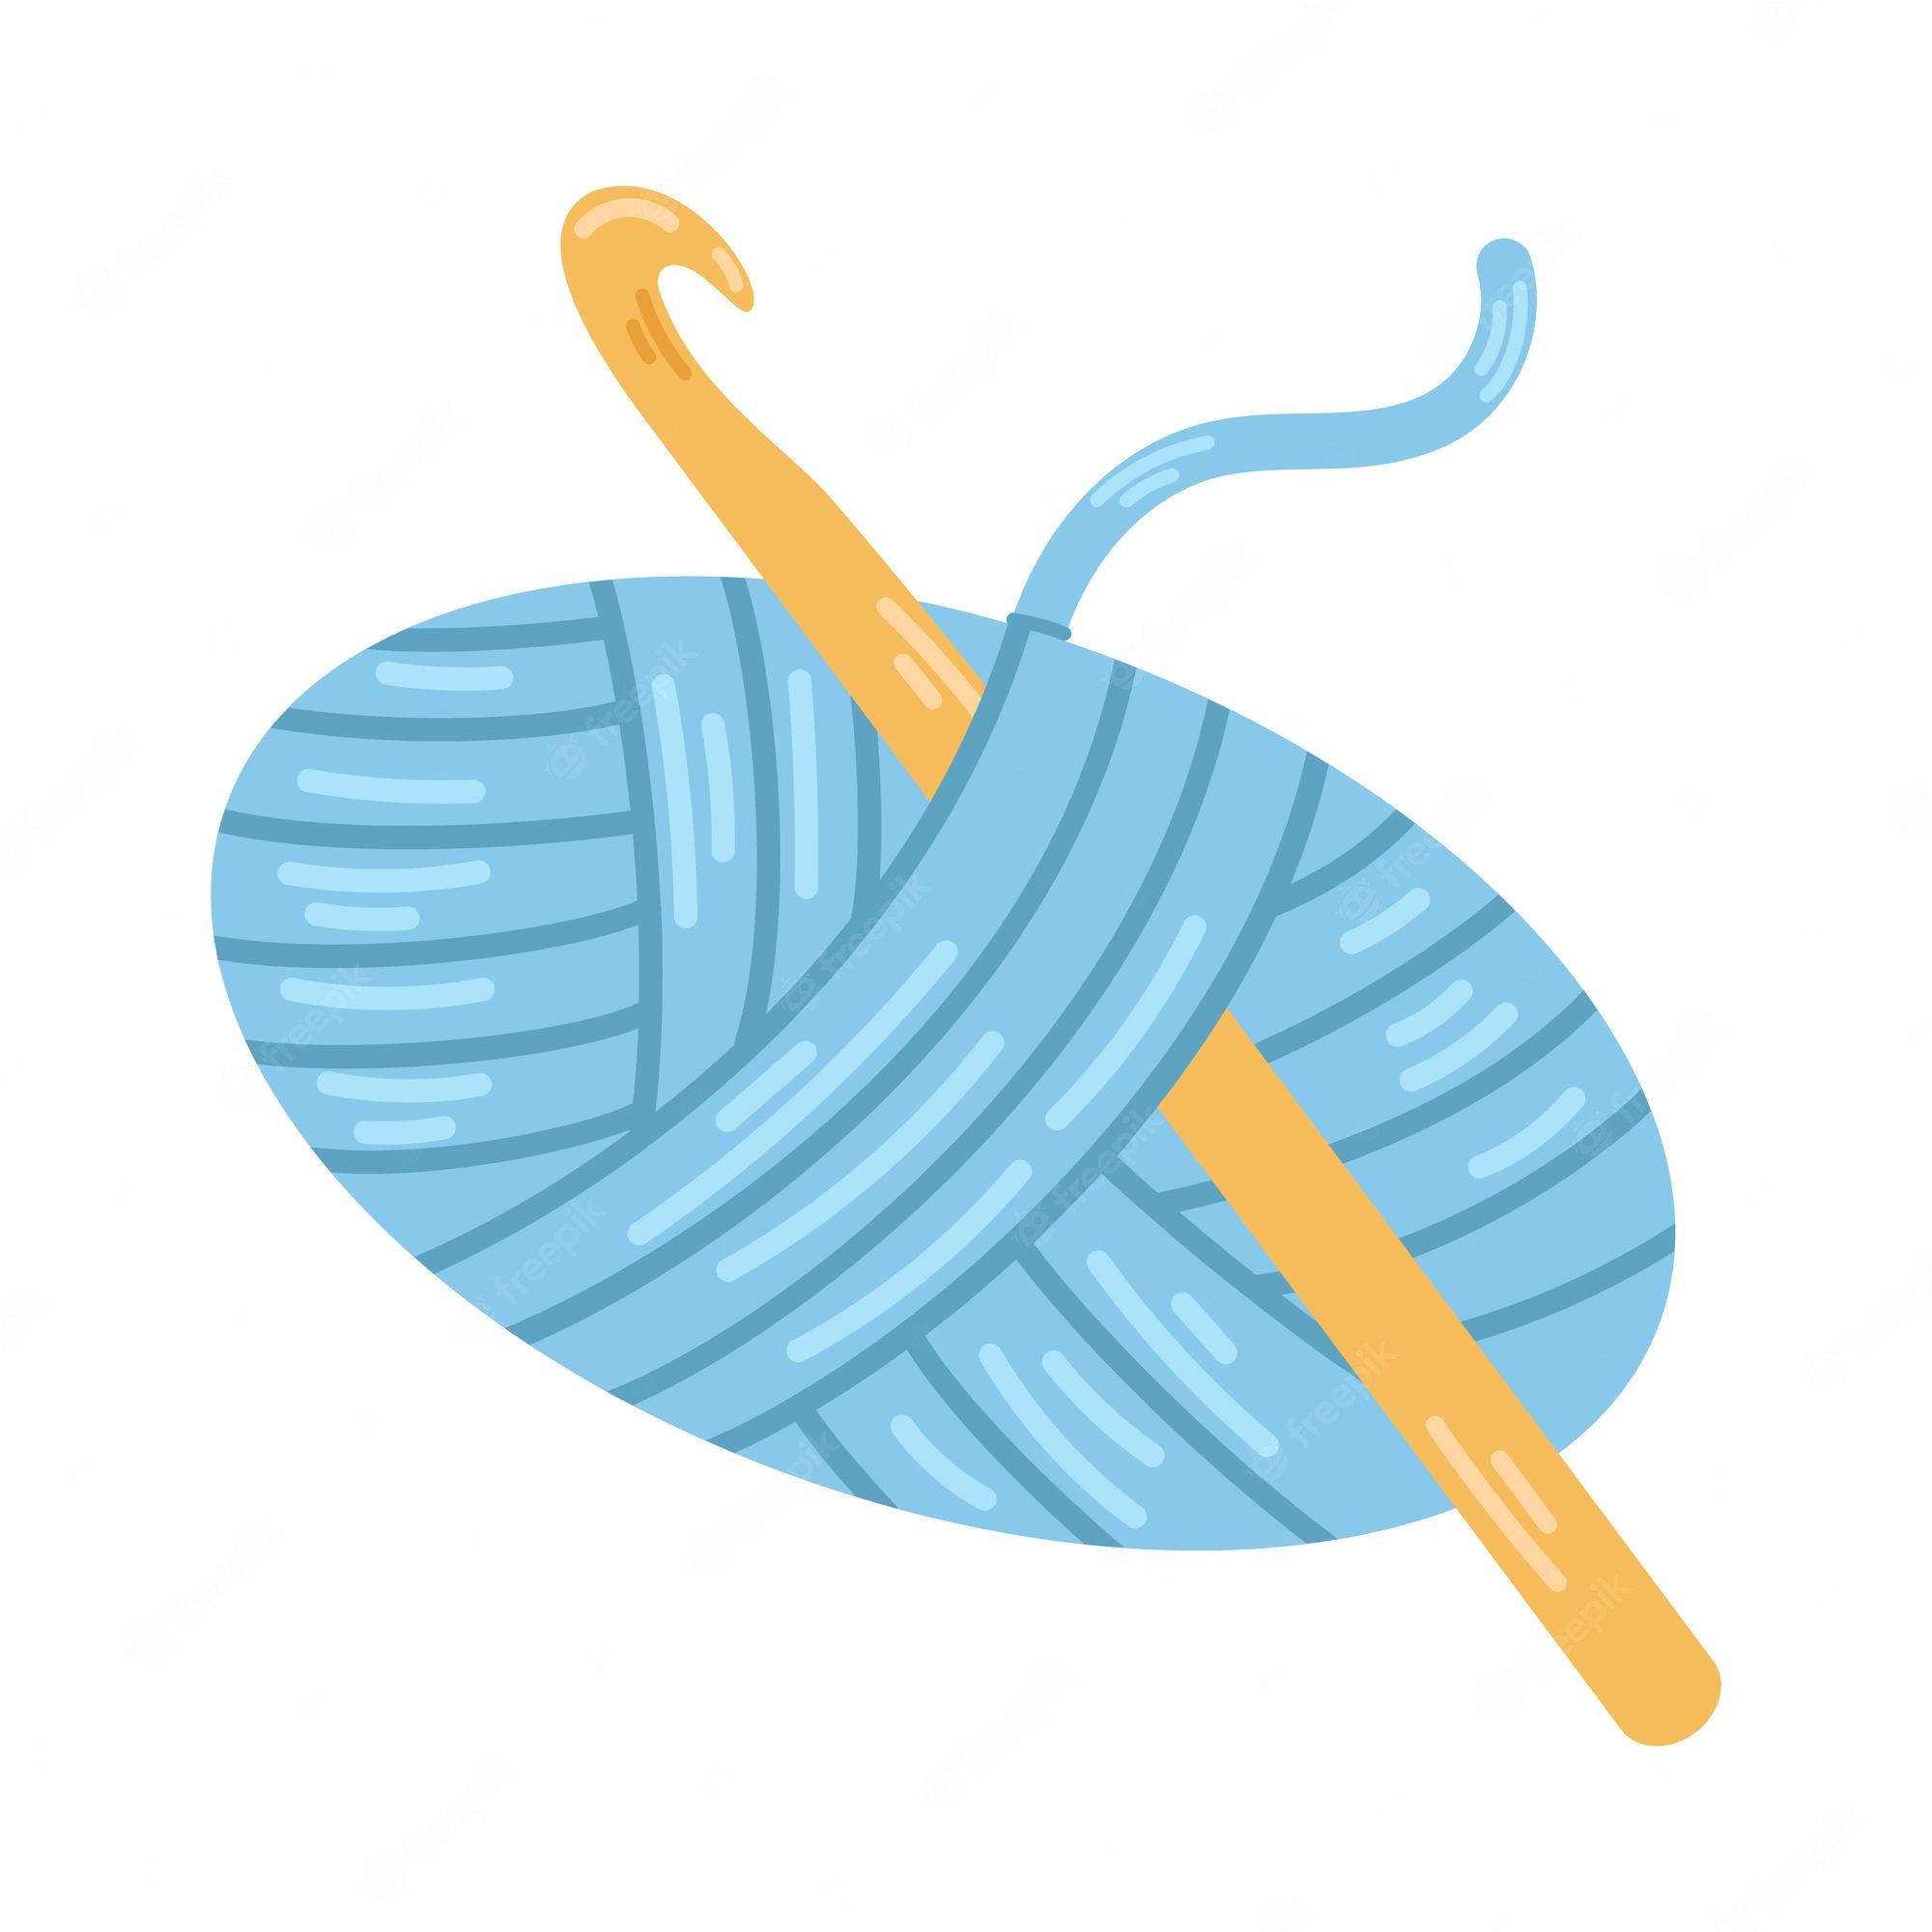 Yarn And Crochet Hook Clip Art N4 free image download - Clip Art Library